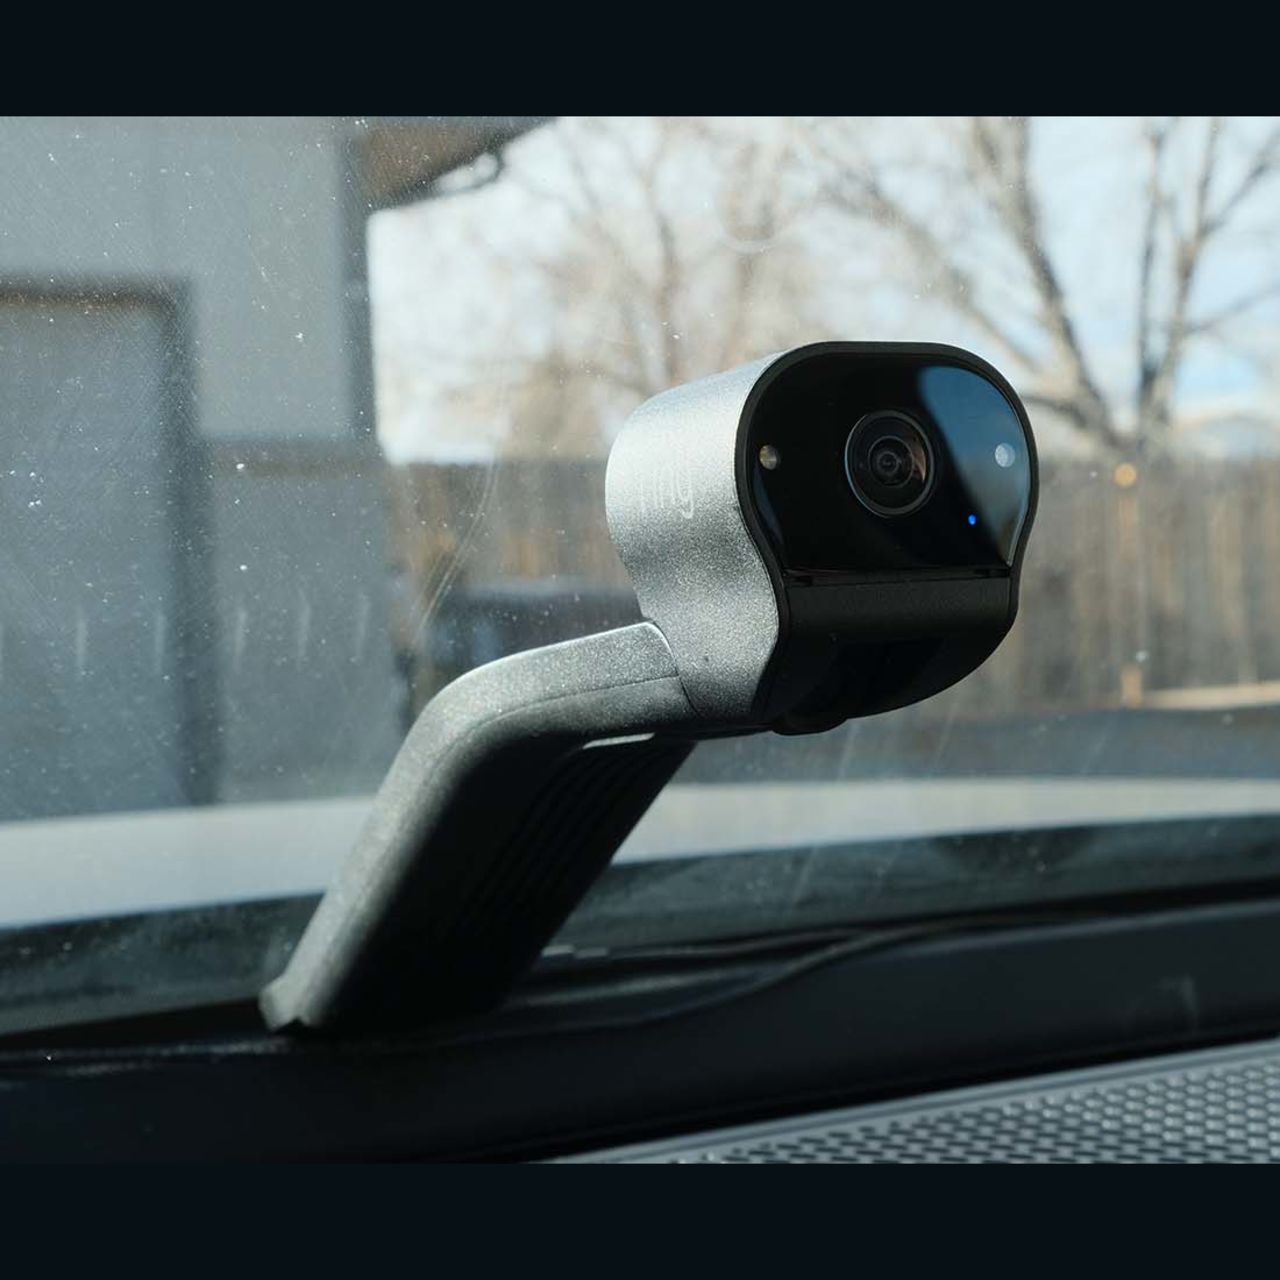 Ring's Car Camera Is An Impressive Security System, But Average Dash Cam